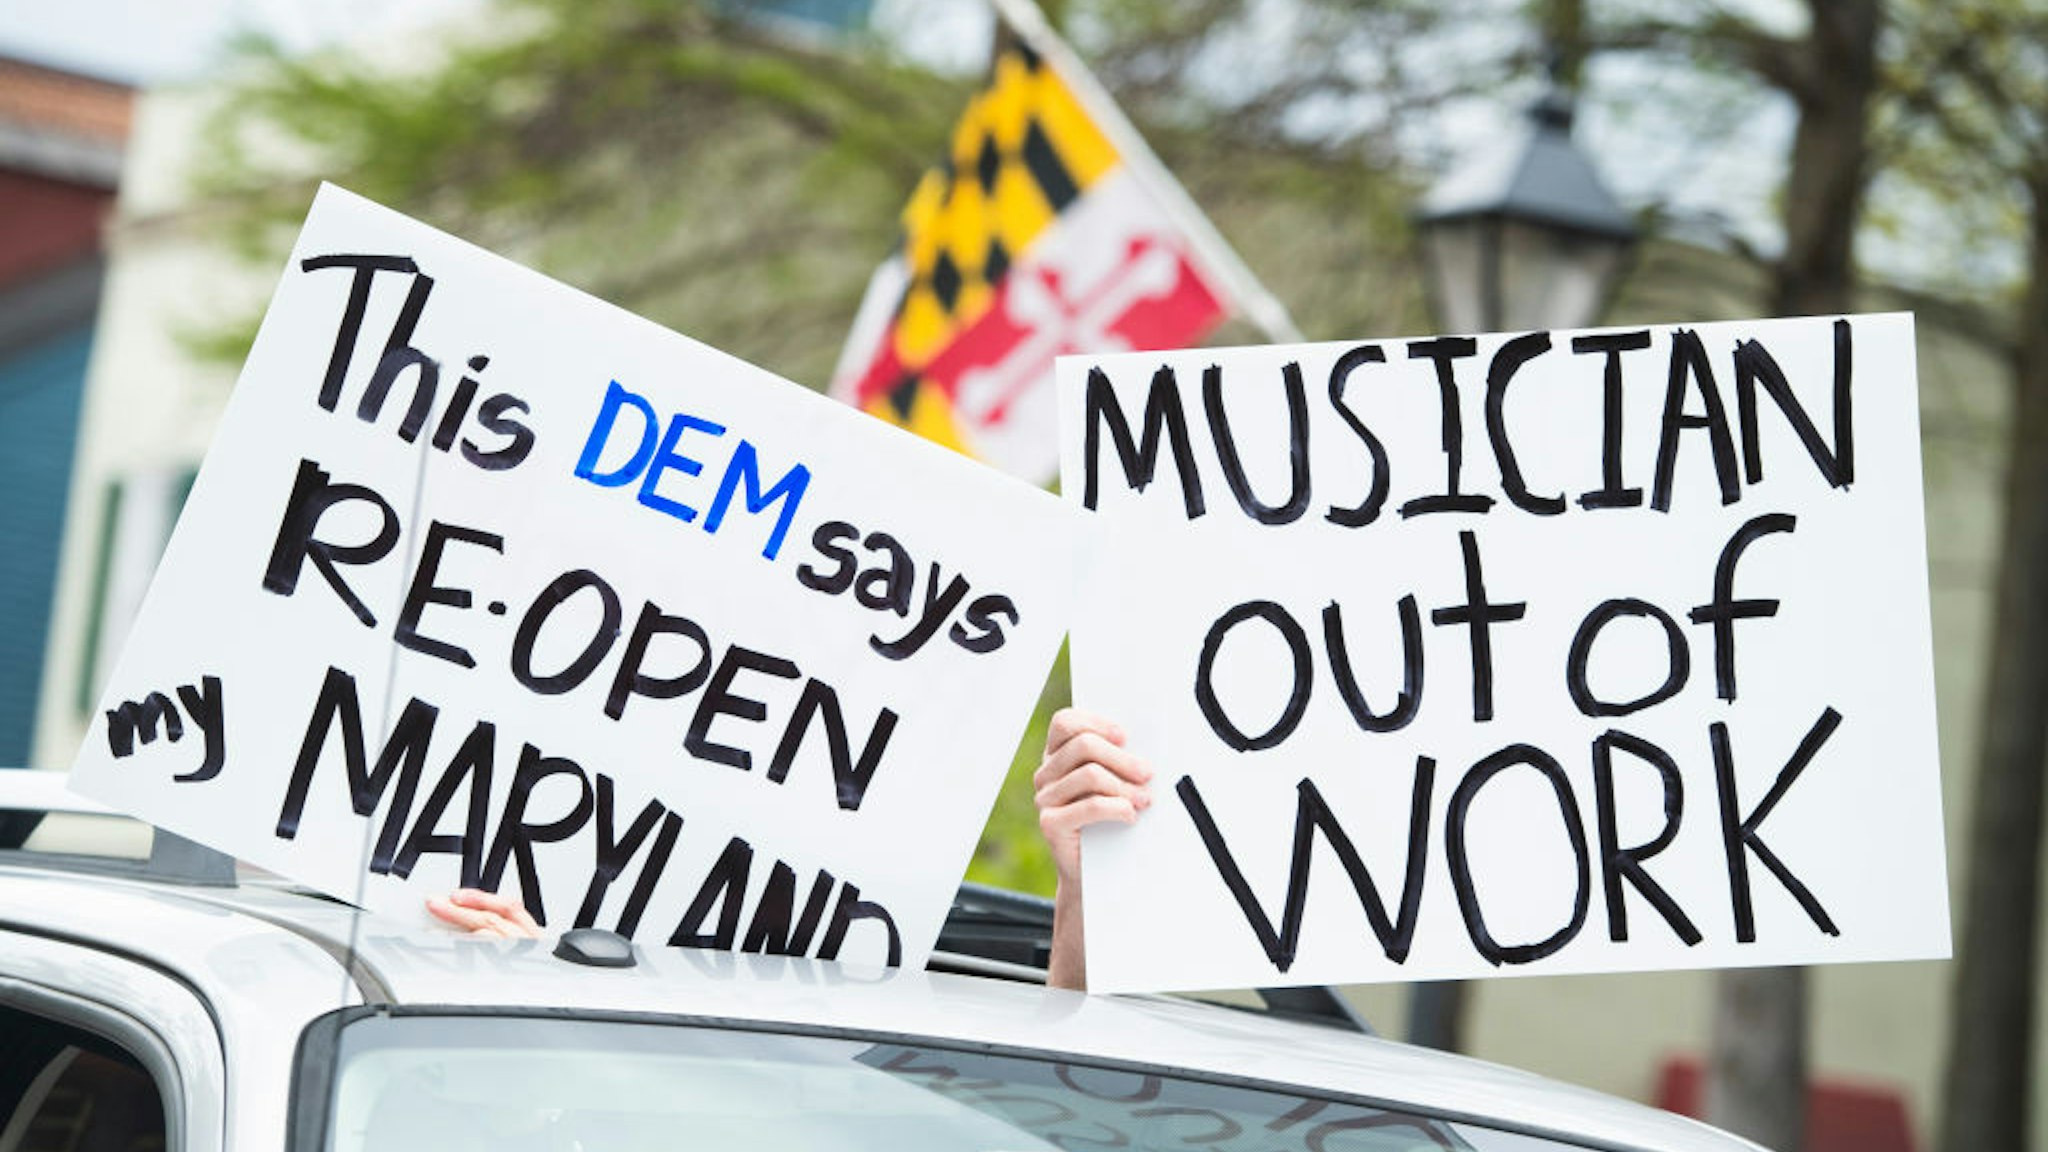 Demonstrators demand that Gov. Larry Hogan (R) lift restrictions that have closed certain businesses in Maryland since the coronavirus outbreak on Church Circle in Annapolis, Md., on Saturday, April 18, 2020. The event titled Operation Gridlock Annapolis was hosted by the Patriot Picket and Reopen Maryland. (Photo By Tom Williams/CQ-Roll Call, Inc via Getty Images)